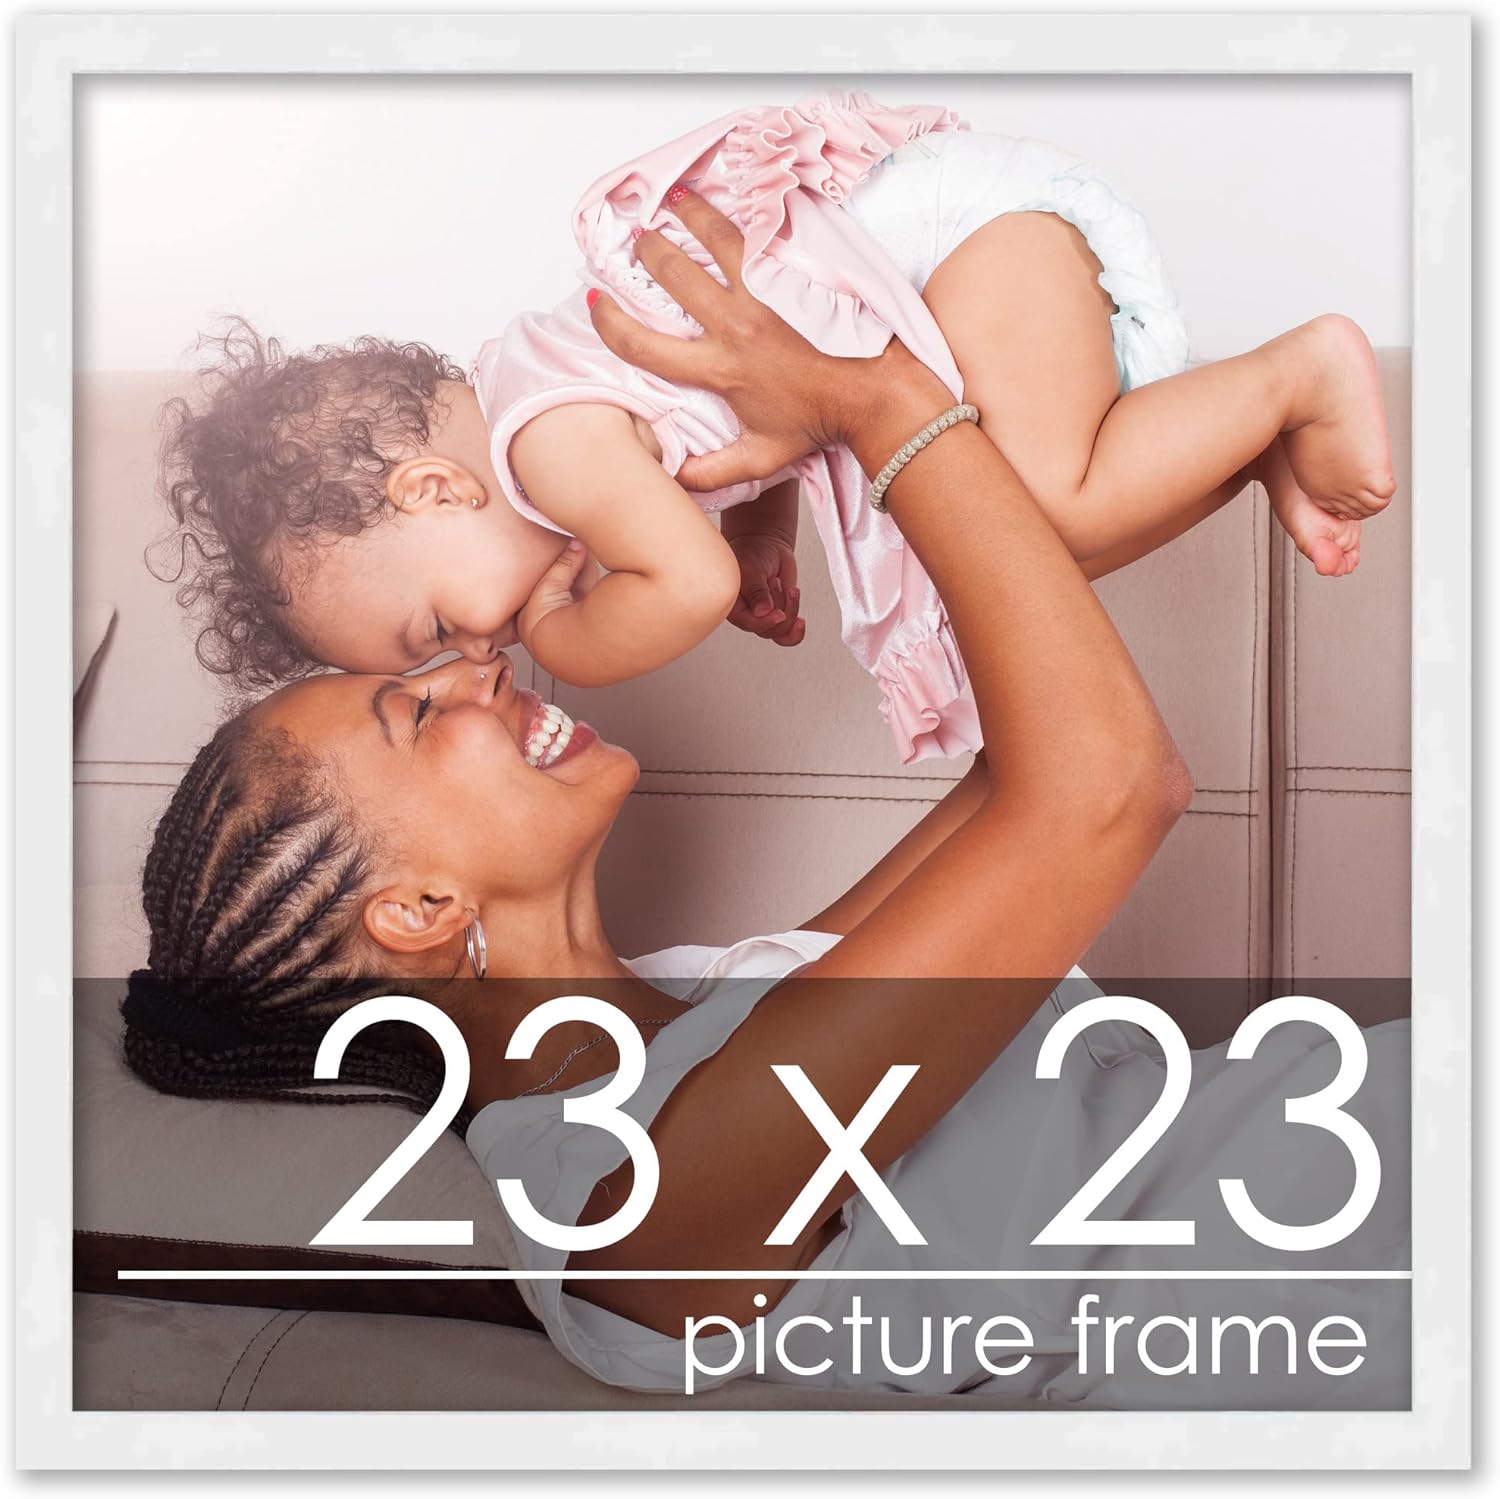 12x36 Contemporary White Wood Picture Panoramic Frame - Picture Frame Includes UV Acrylic, Foam Board Backing, & Hanging Hardware! Panoramic Poster Frame